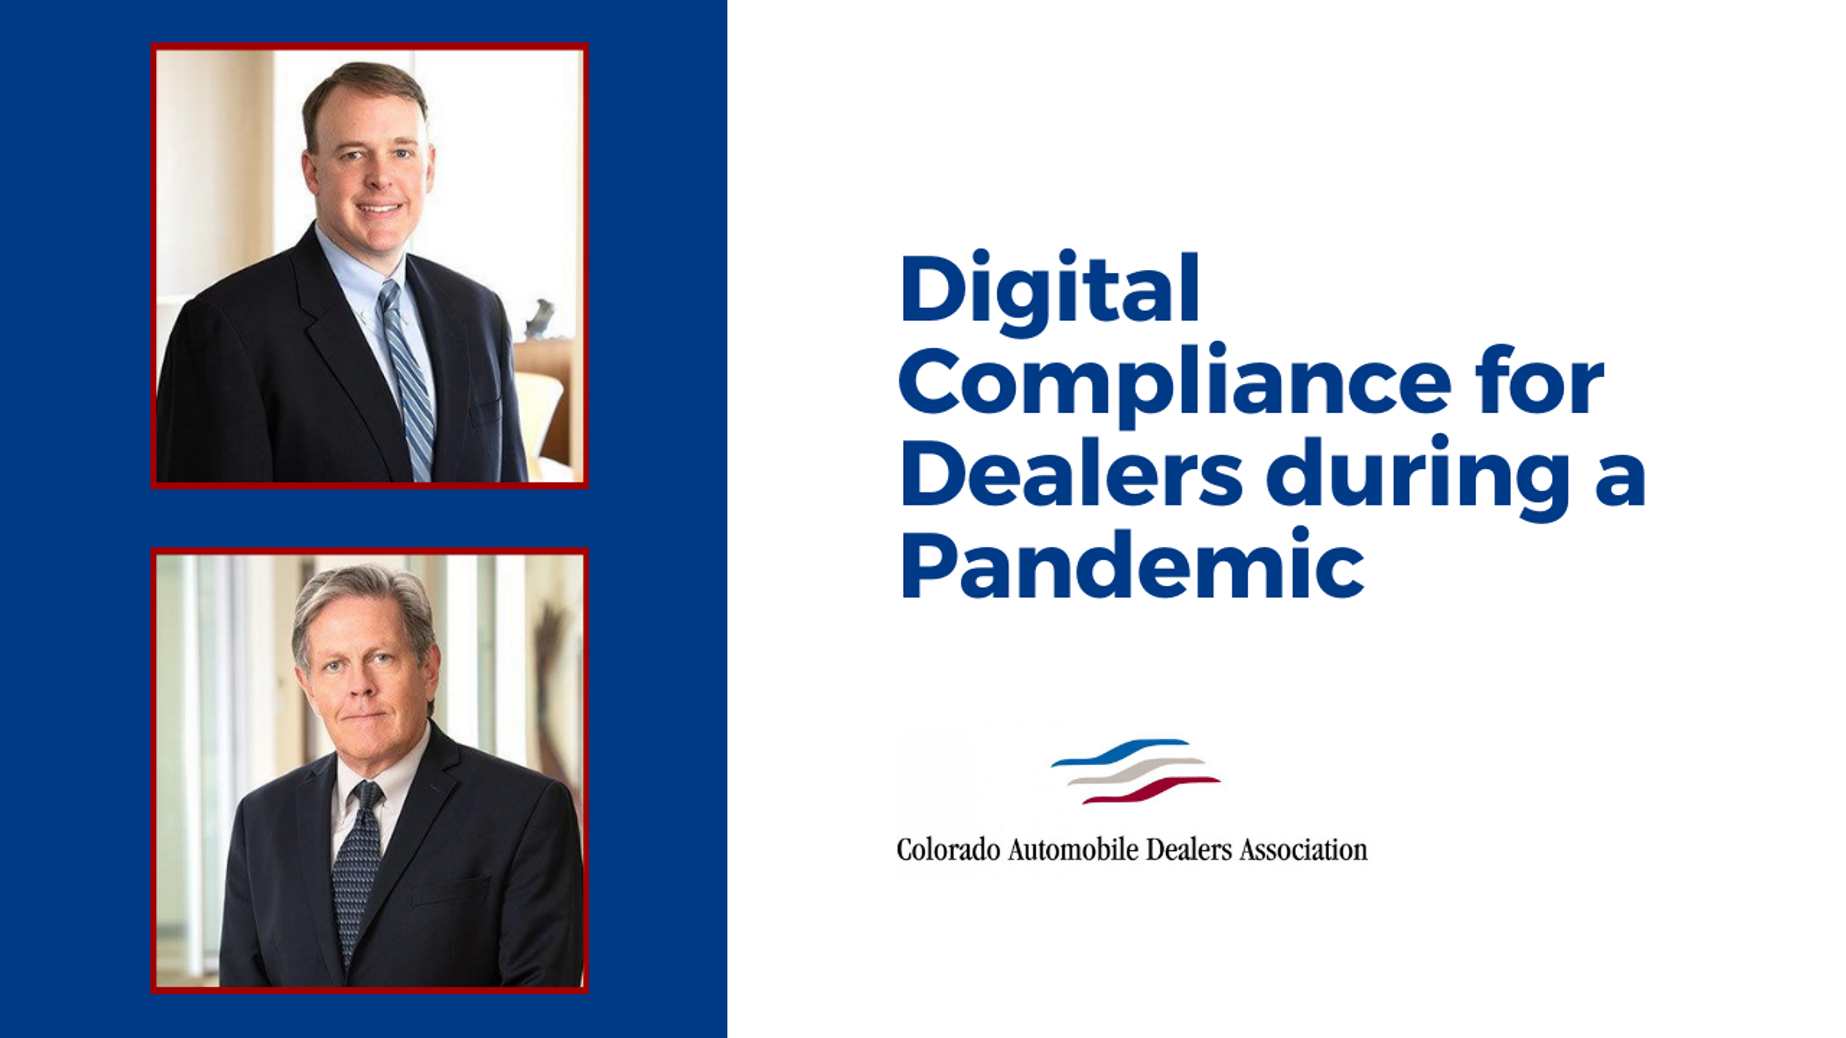 Digital Compliance for Dealers during a Pandemic